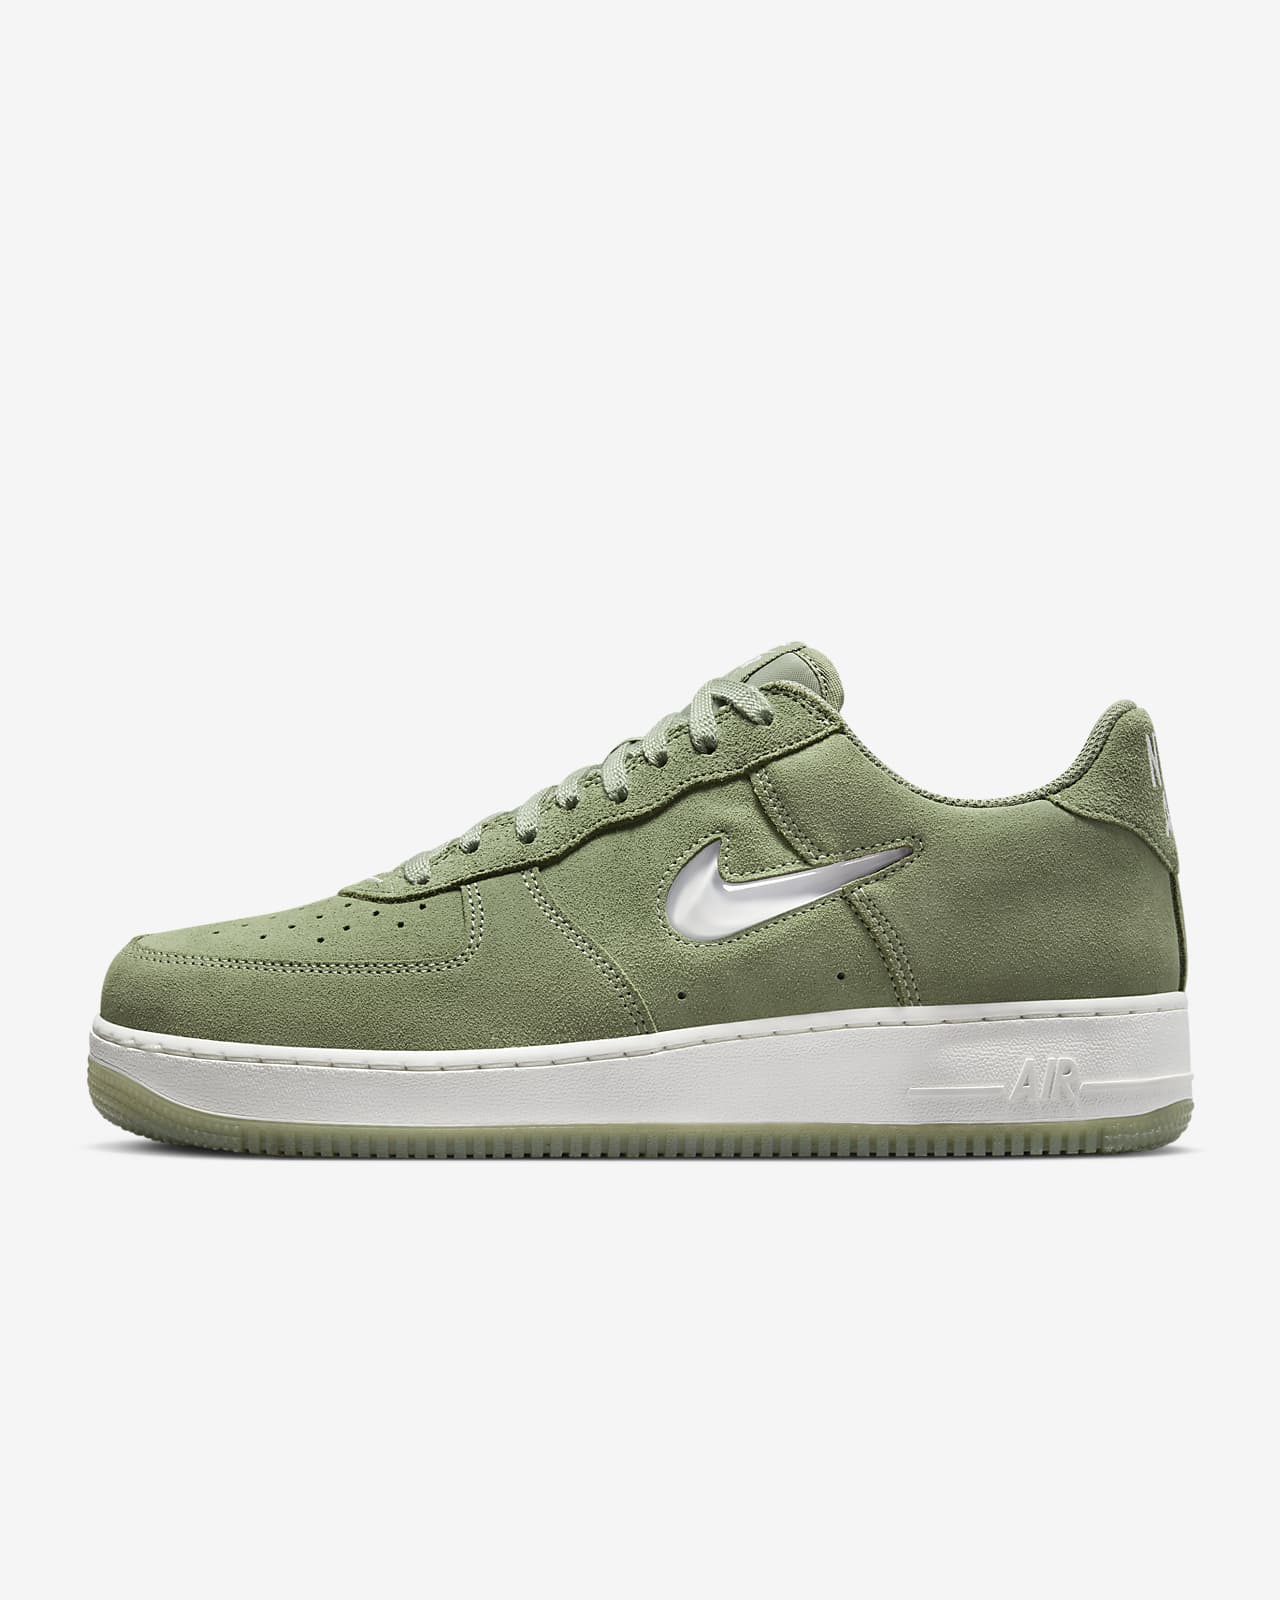  Nike Big Kid's Air Force 1 Low White/Lt Green Spark